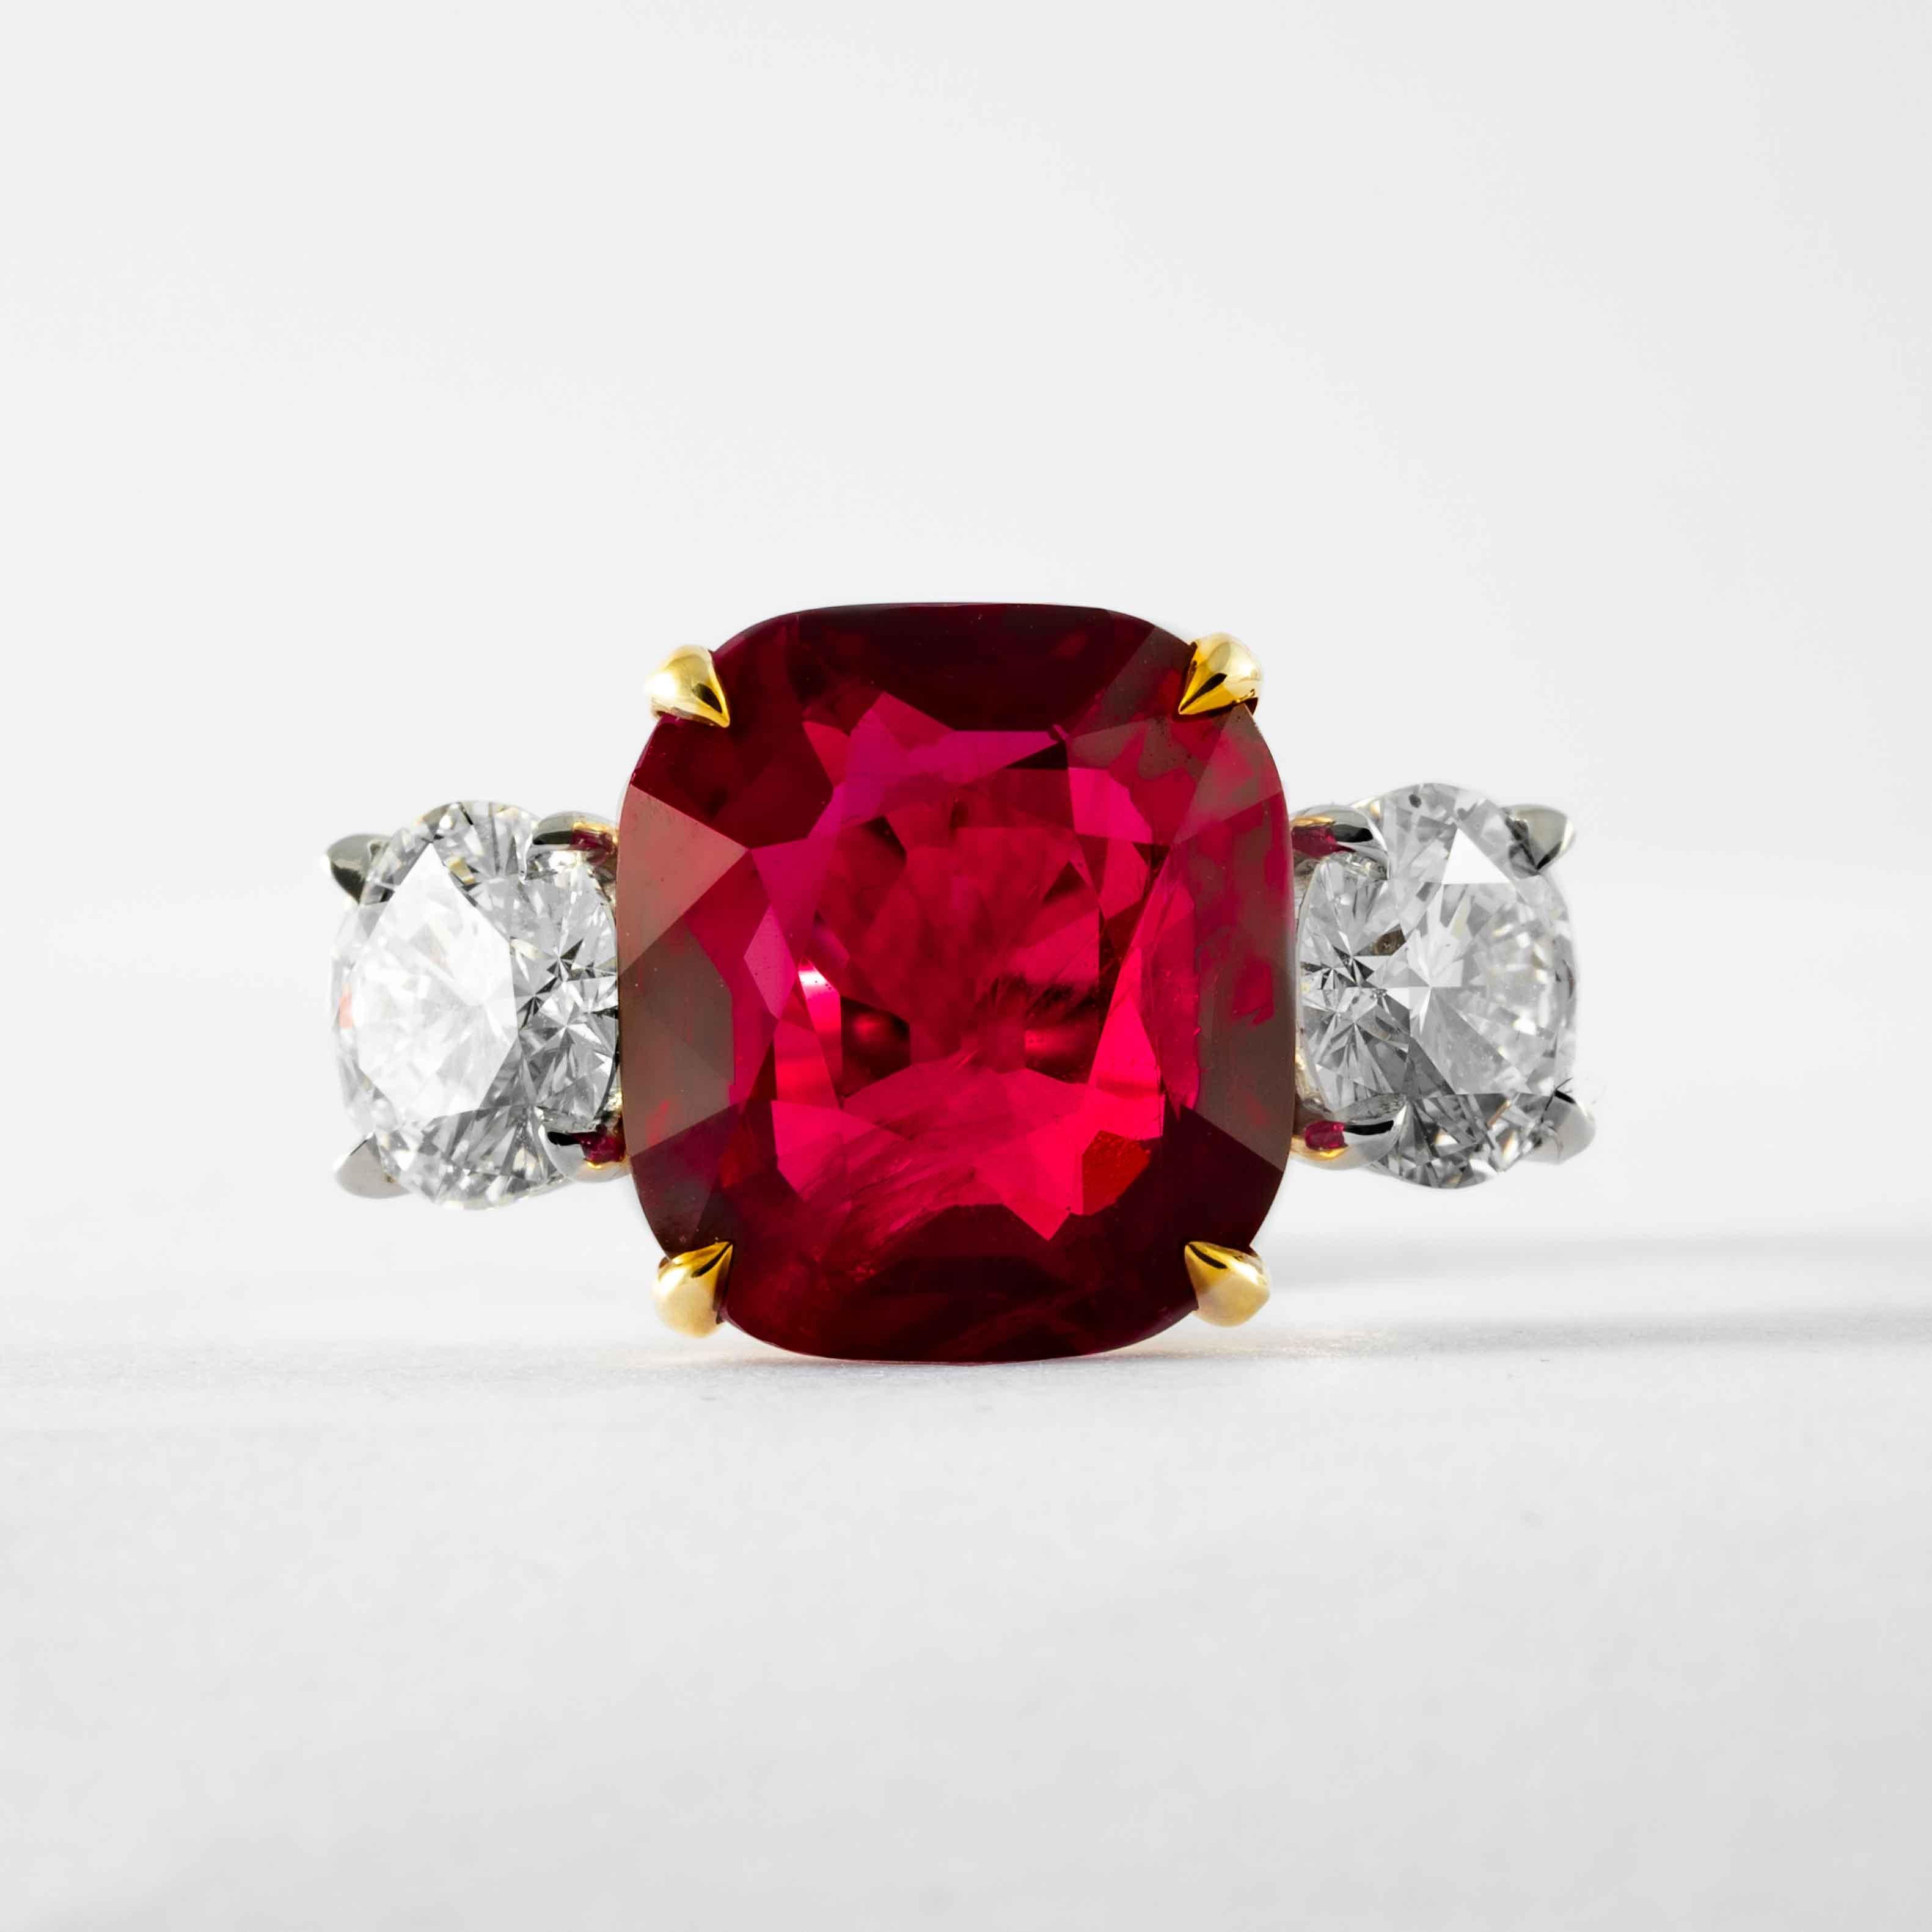 This ruby and diamond 3-stone ring is offered by Shreve, Crump & Low. This cushion cut ruby is custom set in a handcrafted Shreve, Crump & Low classic 3-stone platinum and 18kt yellow gold ring, consisting of 1 extraordinarily saturated red cushion